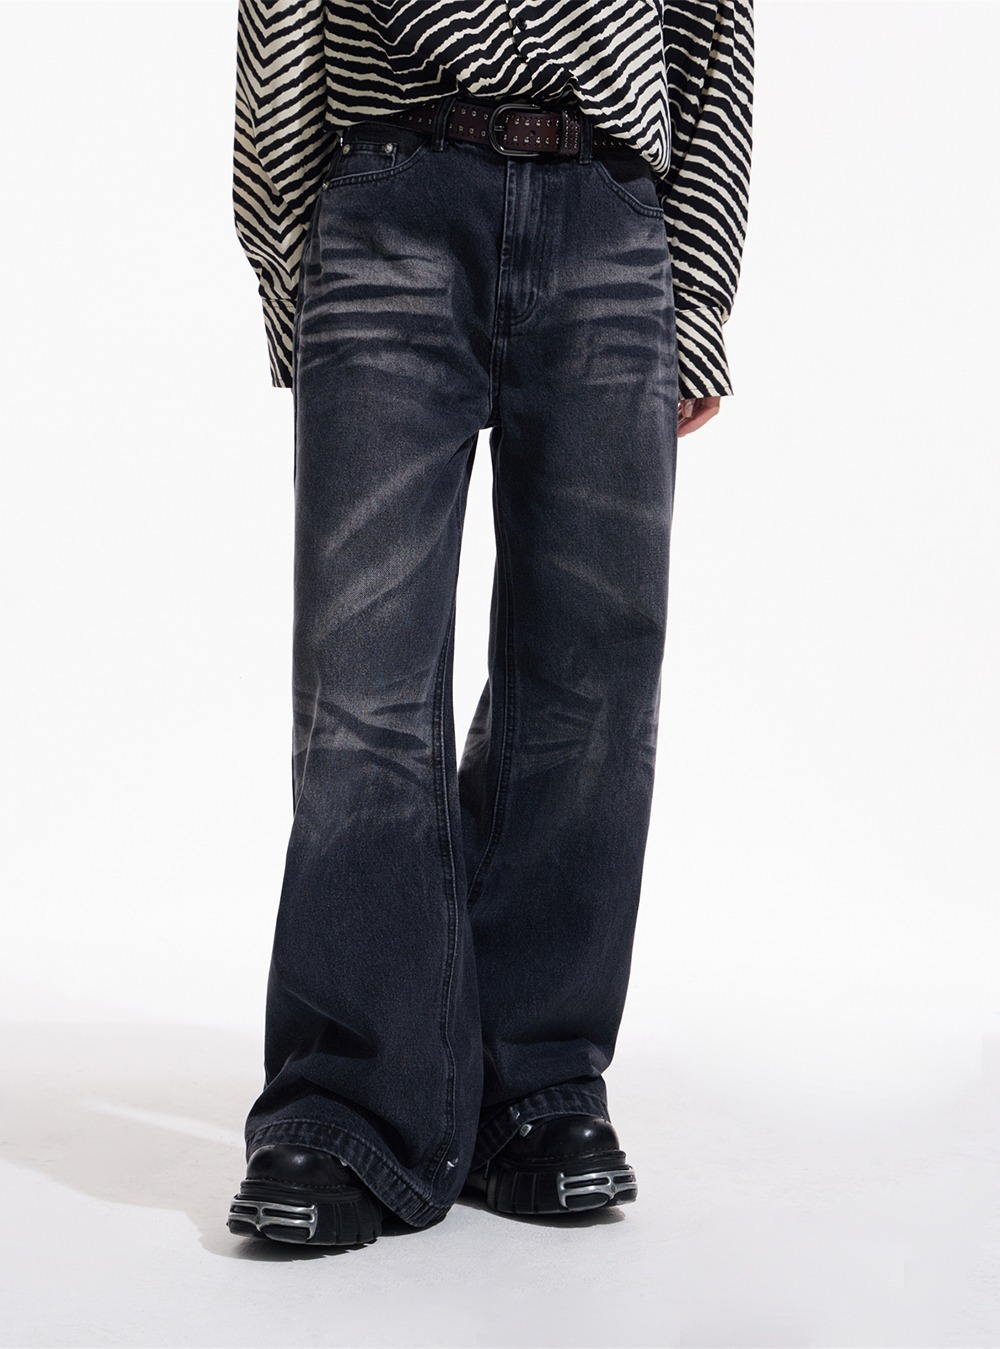 [PEOPLESTYLE] Damage Heavy Waxing Denim Pants (2color)